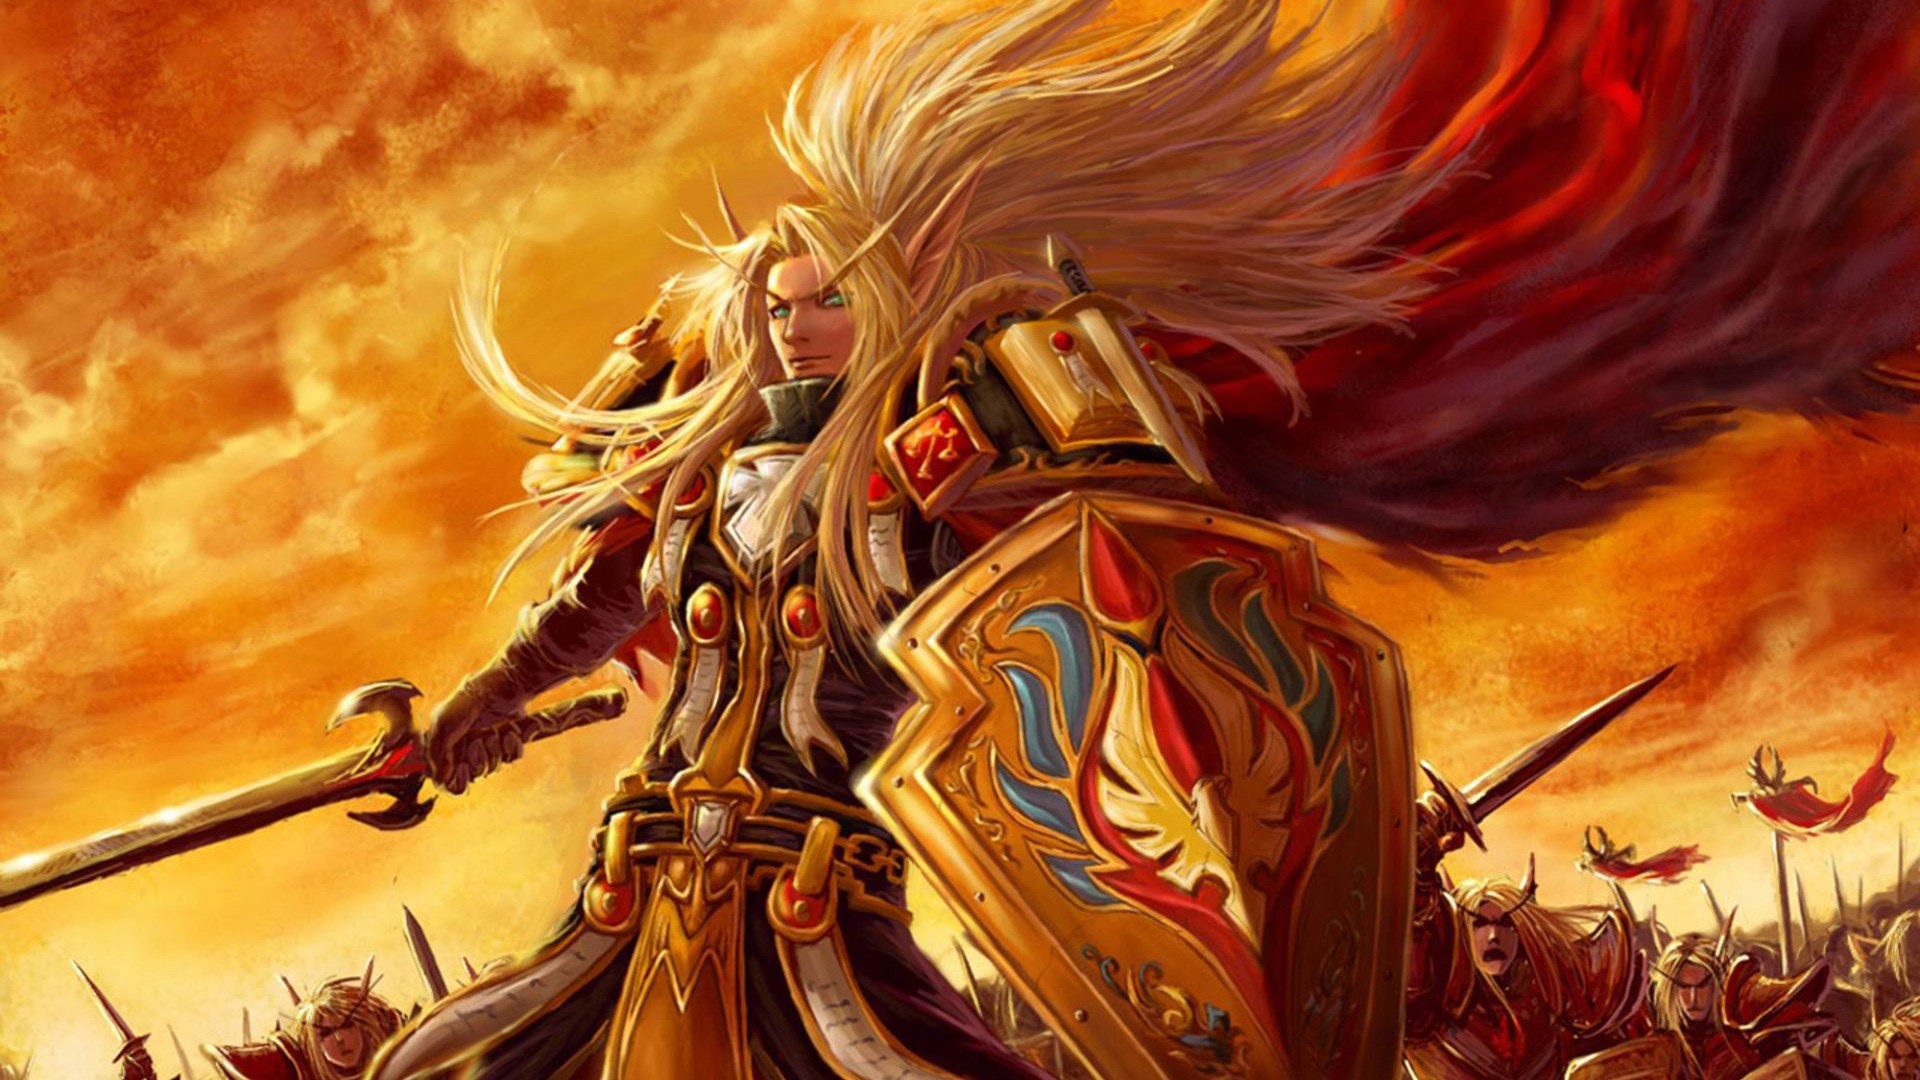 1920x1080 Blood Elf World Of Warcraft Wallpapers HD Wallpapers | HD Wallpapers |  Pinterest | Game background, Blood elf and Hd wallpaper